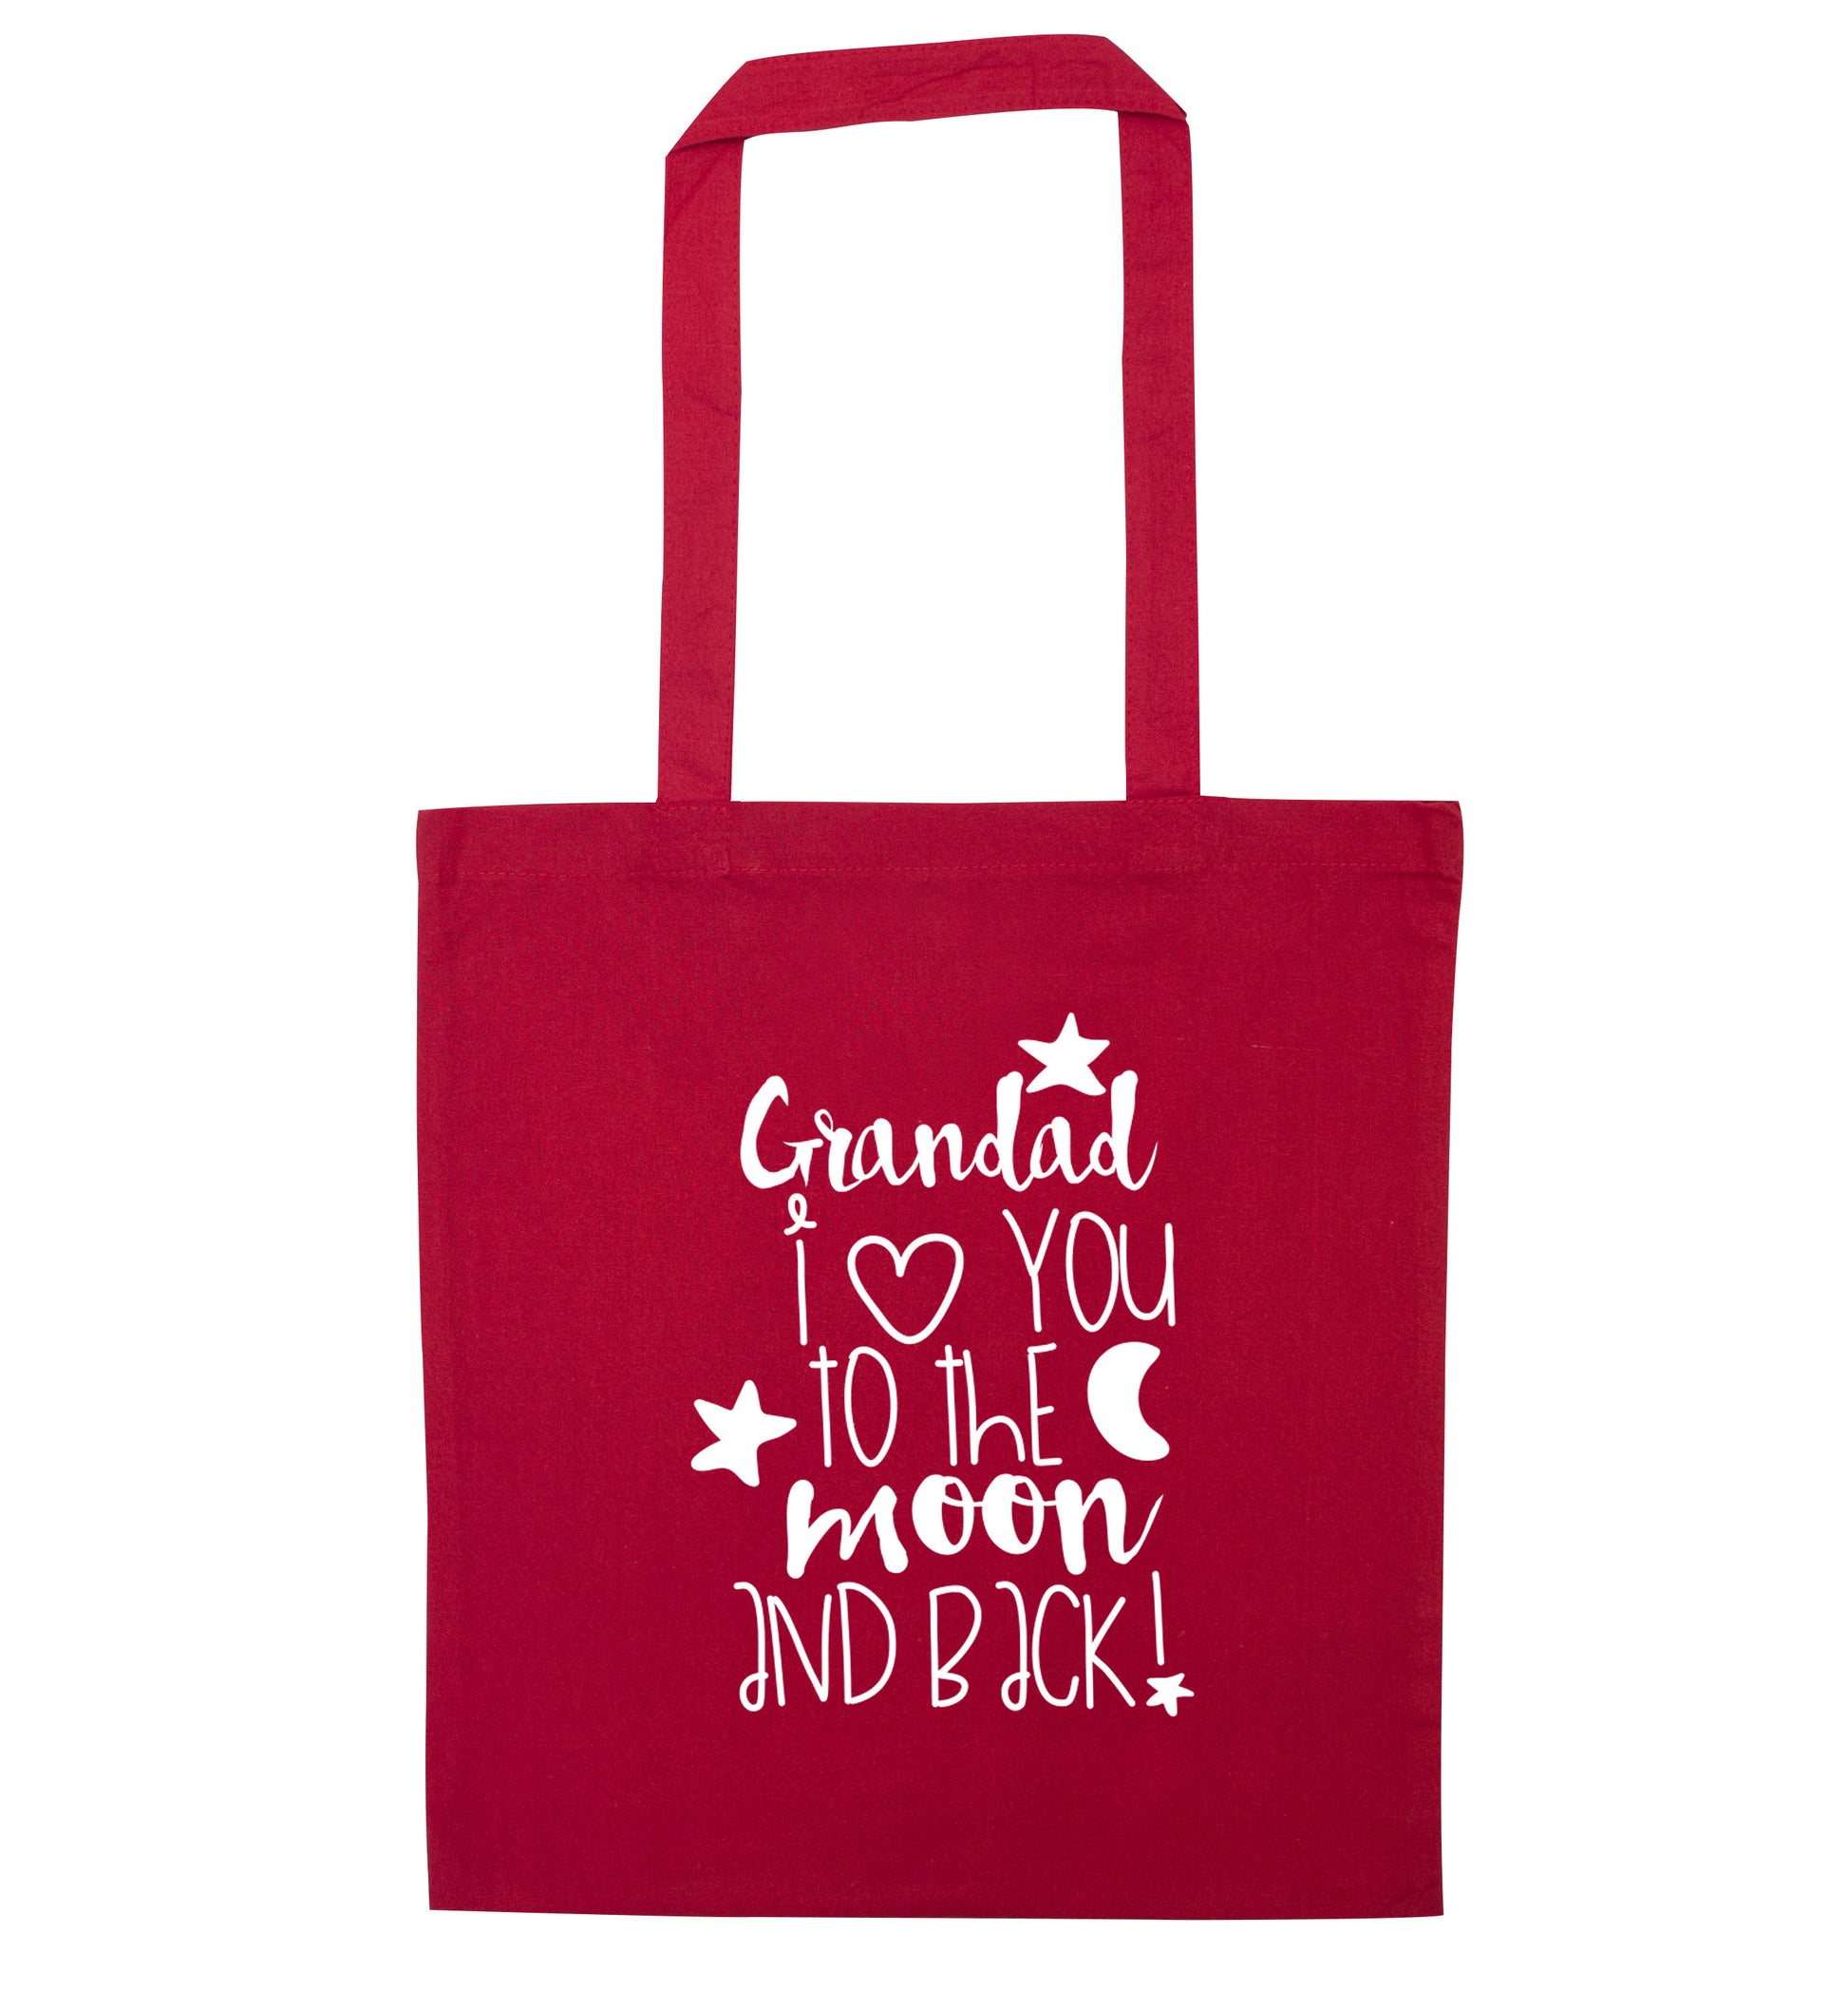 Grandad's I love you to the moon and back red tote bag